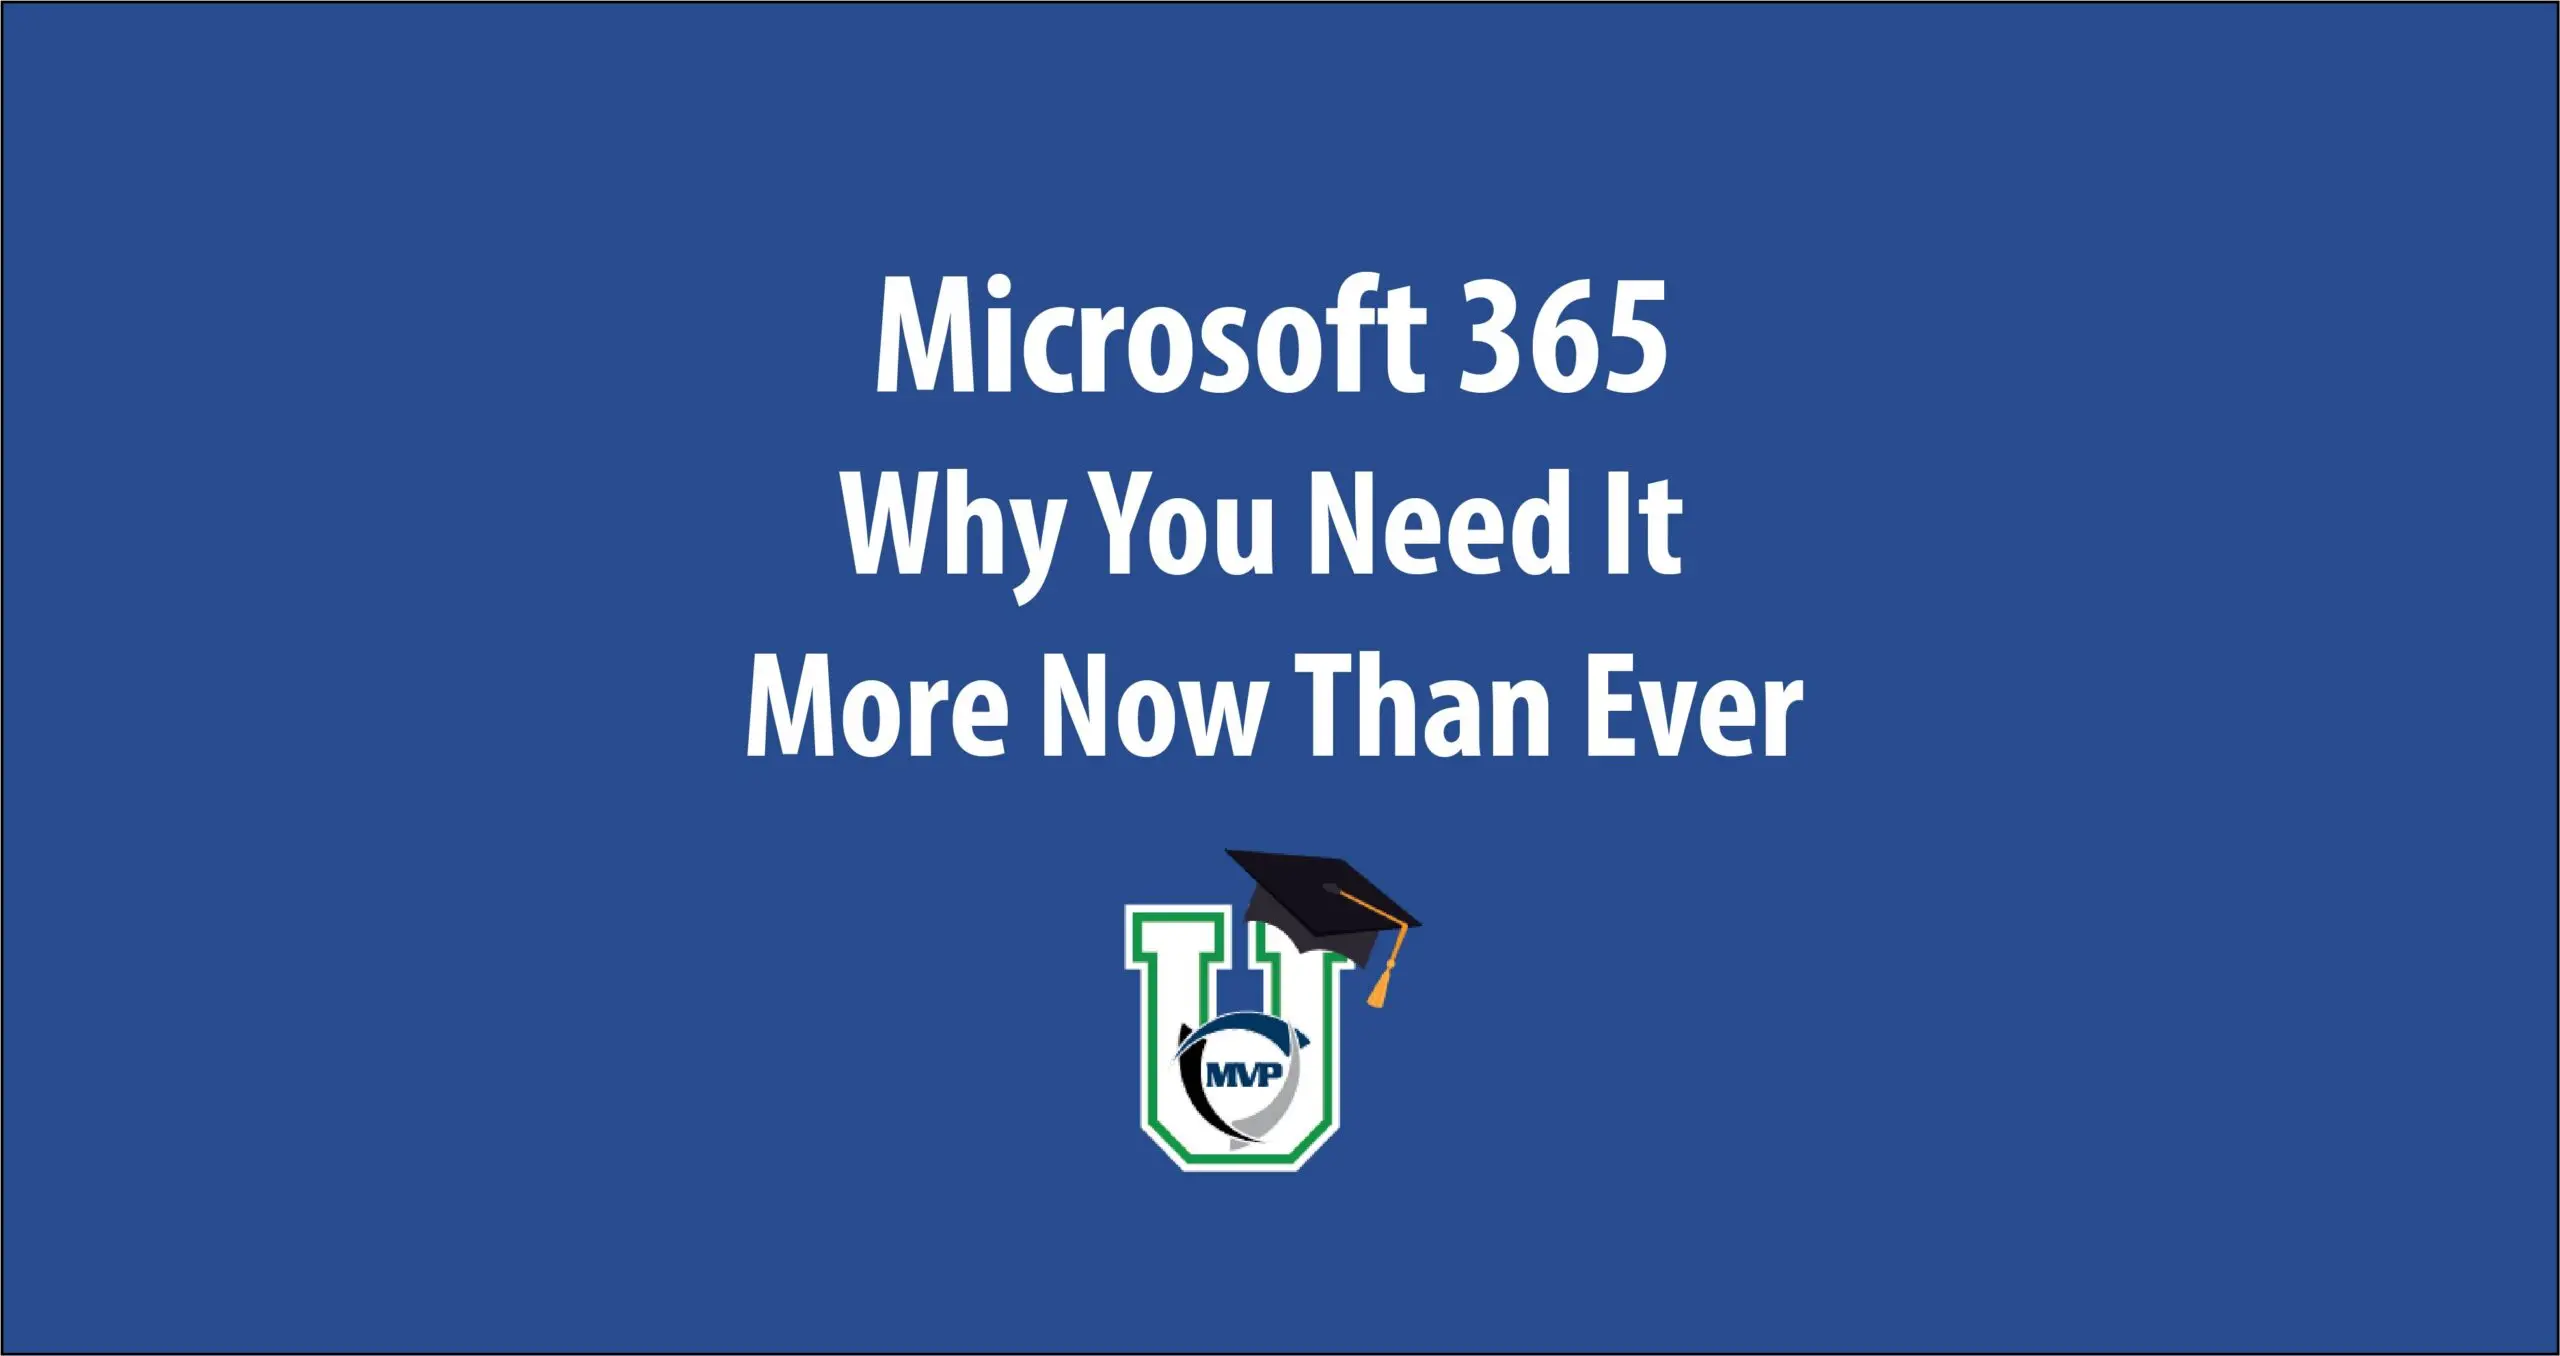 Microsoft 365 Why You Need IT More Now Than Ever